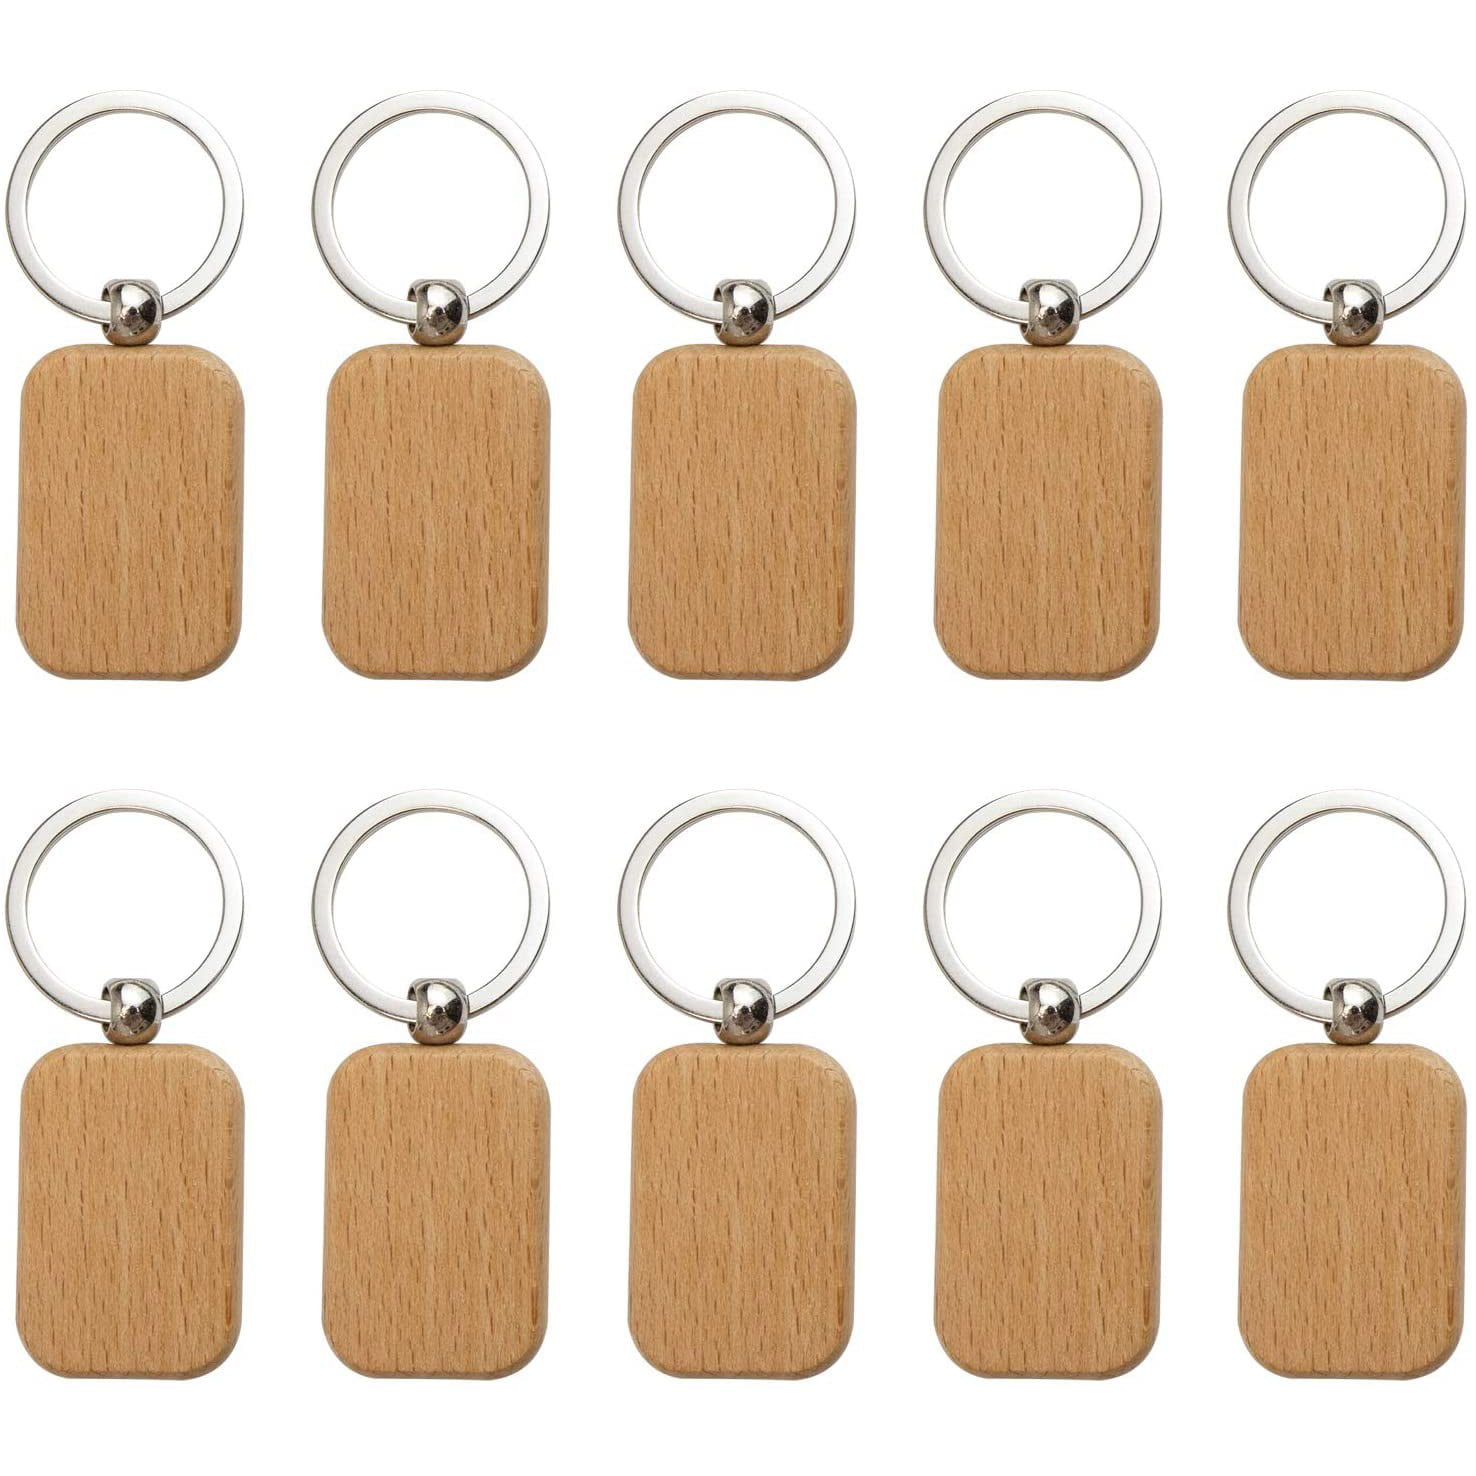 Blank Wooden Key Chain Personalized EDC Wood Keychains - SG 2249 -  IdeaStage Promotional Products